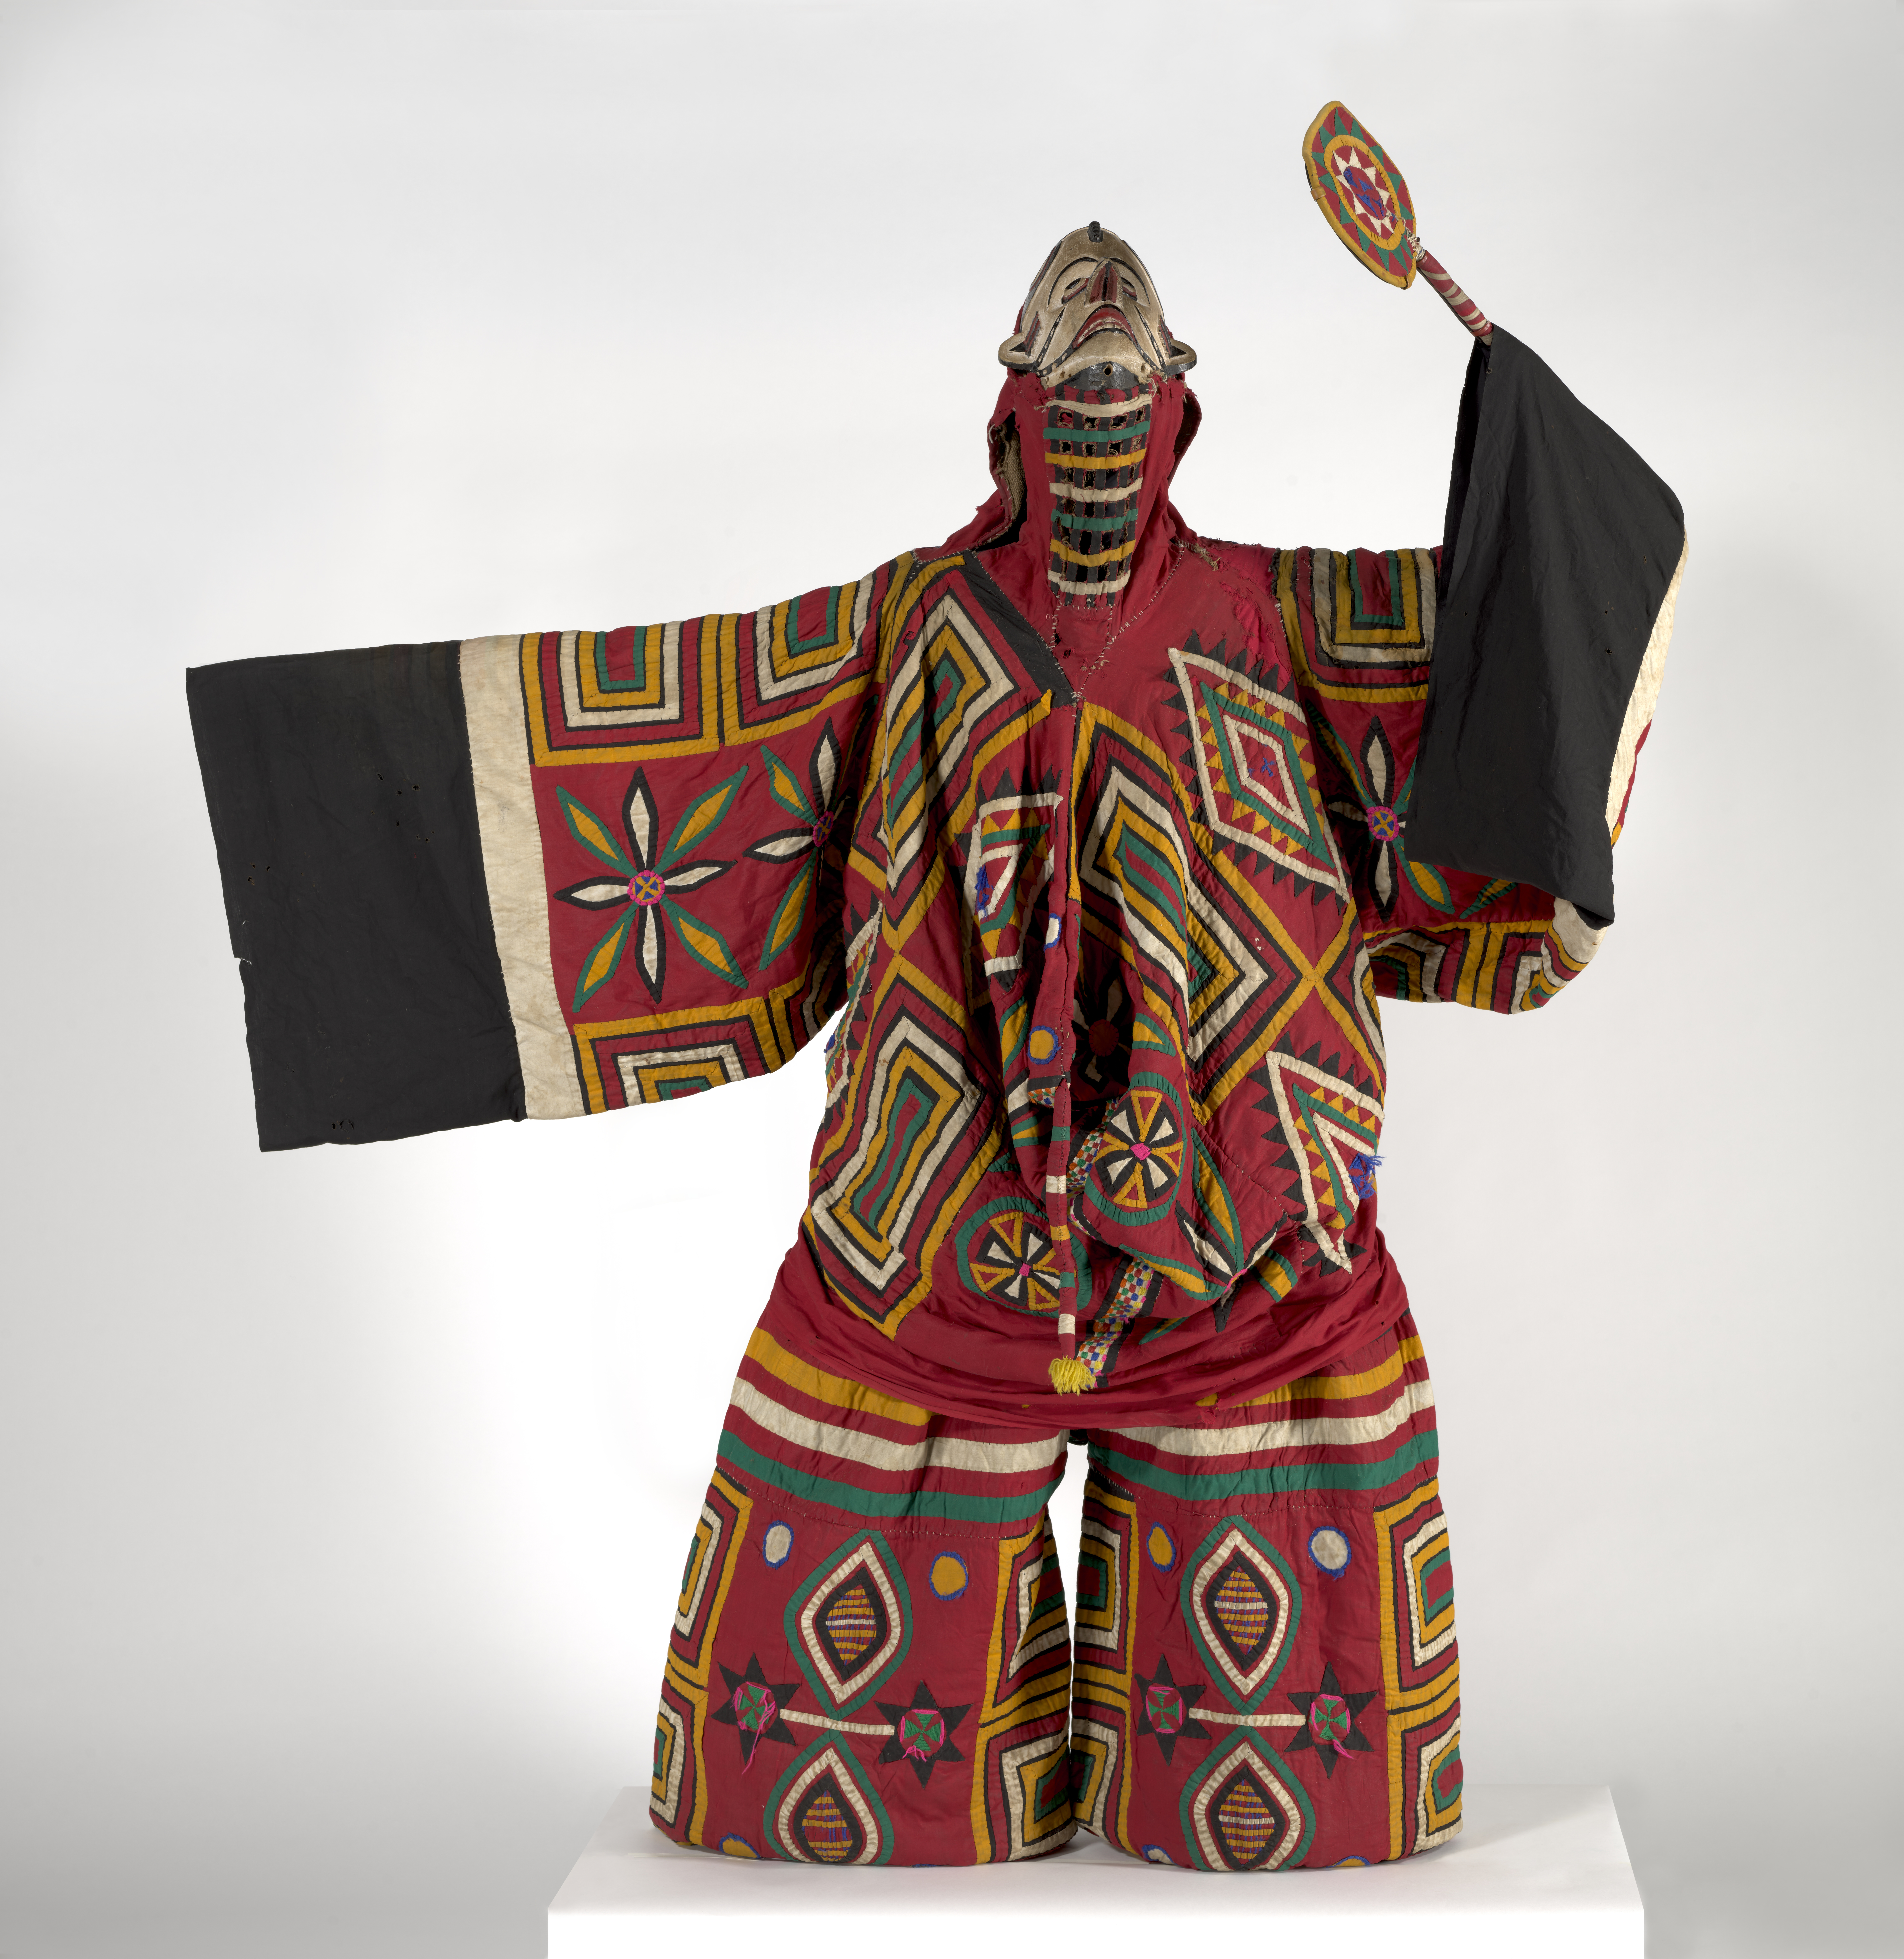 A red masquerade costume with a colorful pattern of flower shapes and nested rectangles, and wide sleeves with sections of solid white and black fabric. The ensemble includes a paddle-like fan with a sunburst design and a white face mask with black and red details. The features on the mask include wide eyes, bared teeth, and textured scars.